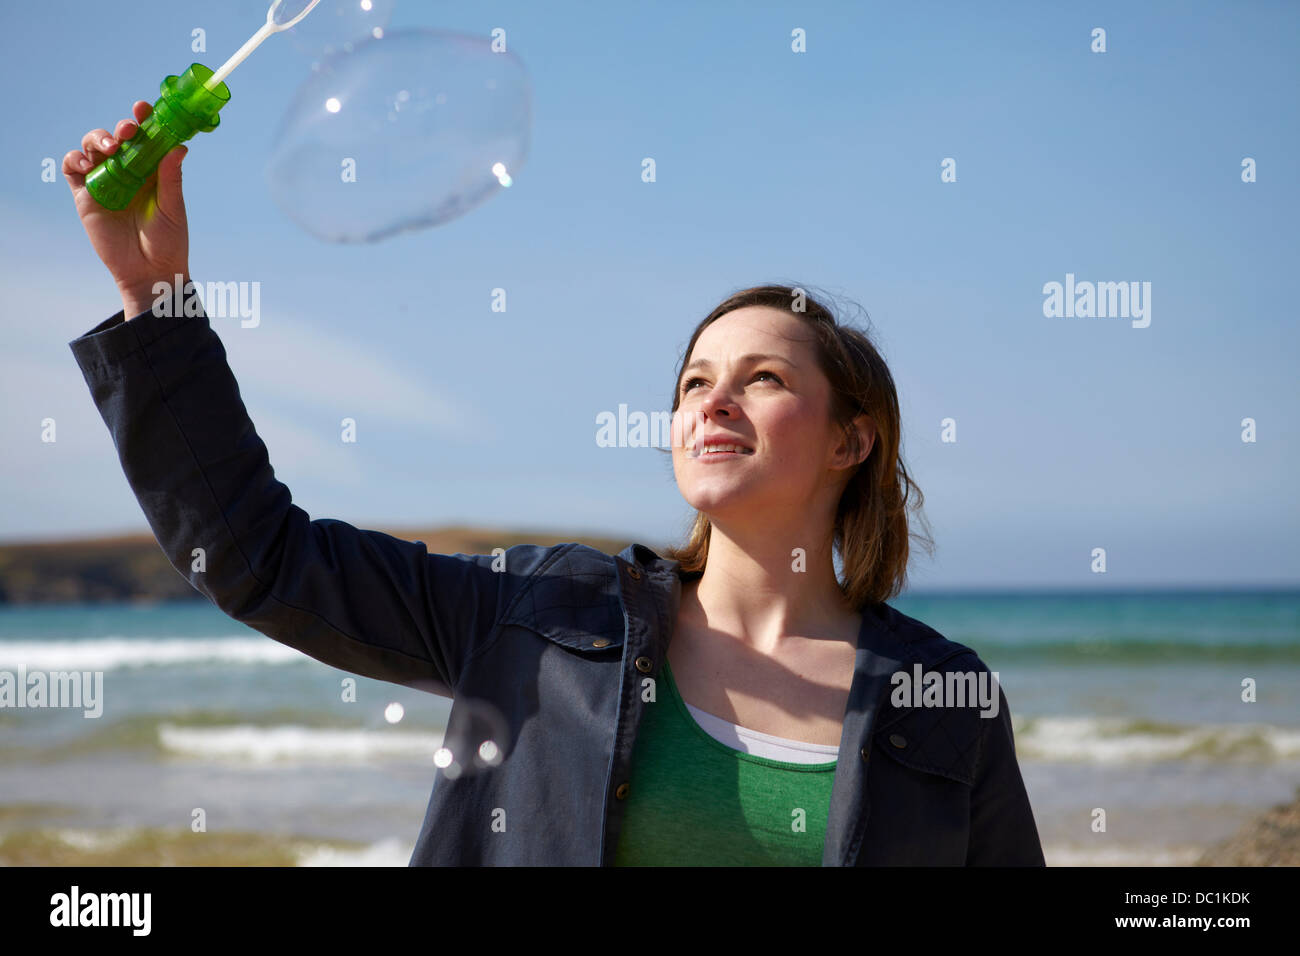 Young woman at coast with bubble wand Stock Photo